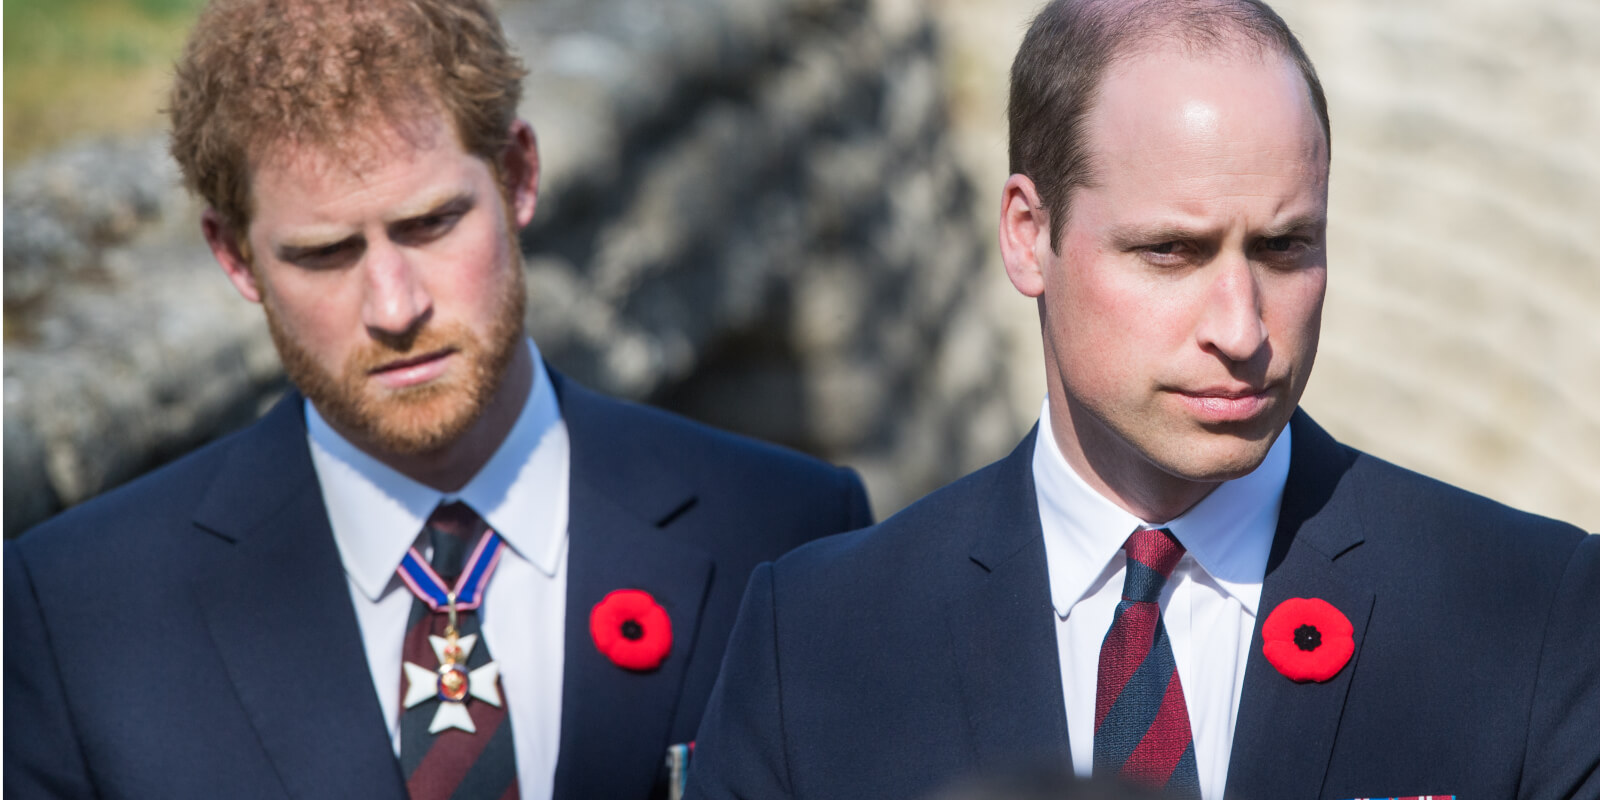 Prince Harry and Prince William attend commemorations for the 100th anniversary of the battle of Vimy Ridge on April 9, 2017 in Lille, France.